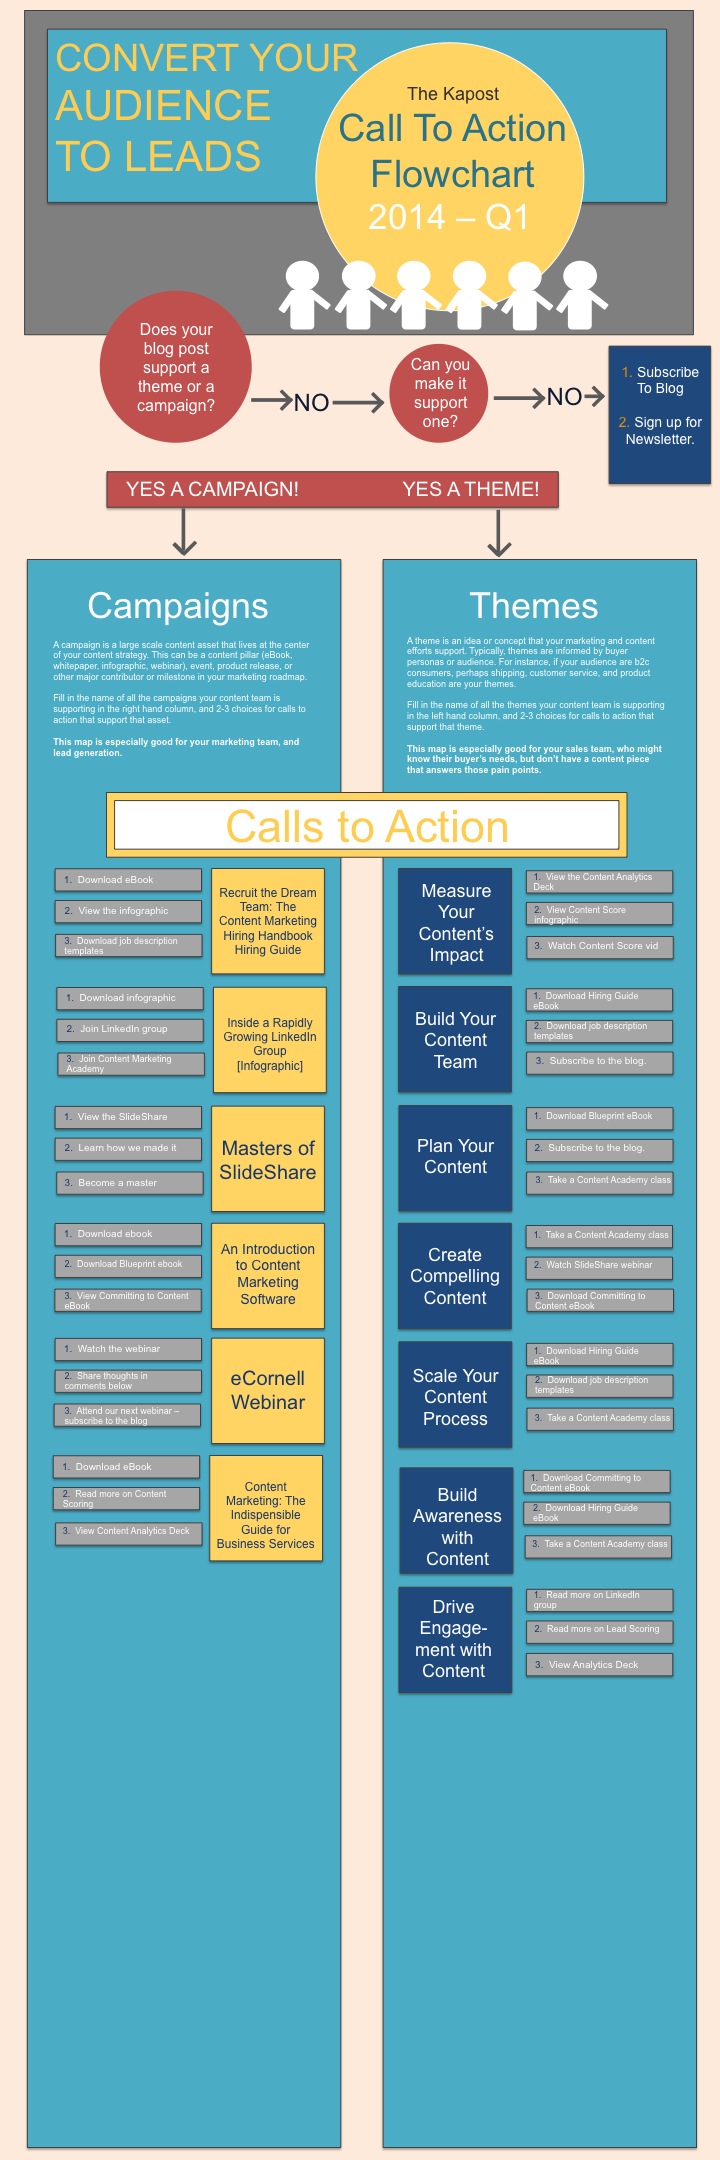 call to action flowchart for converting visitors to leads